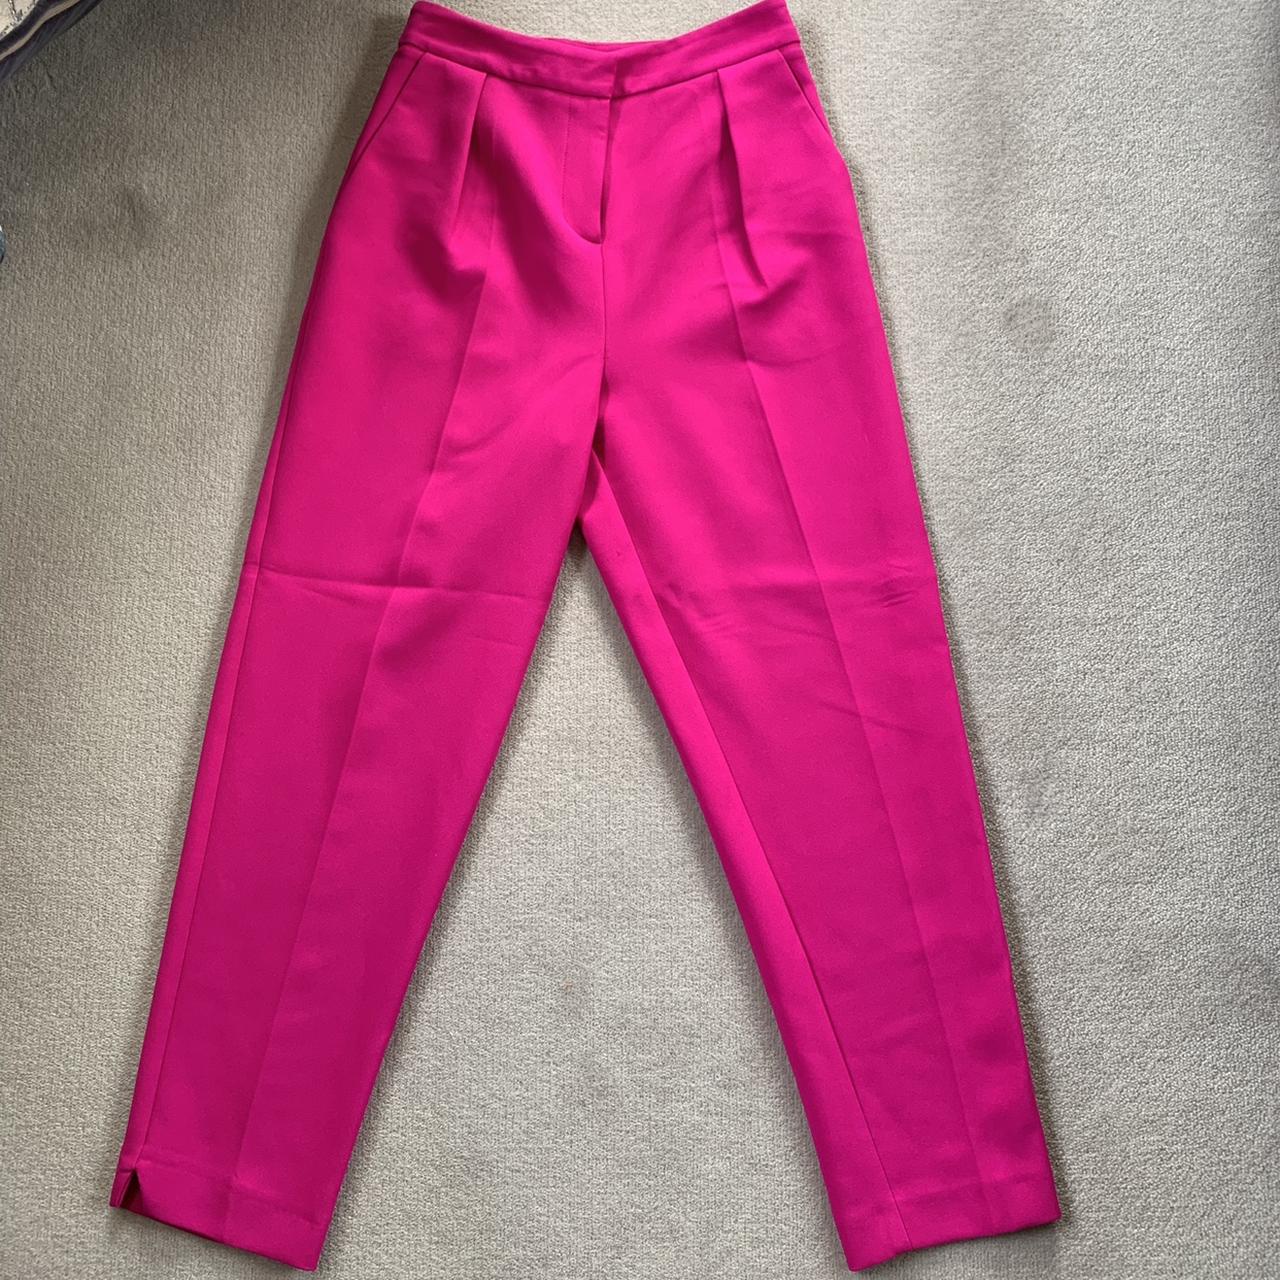 Topshop Pink Circle Belted Wide Leg Pants  Topshop outfit Latest fashion  clothes Fashion